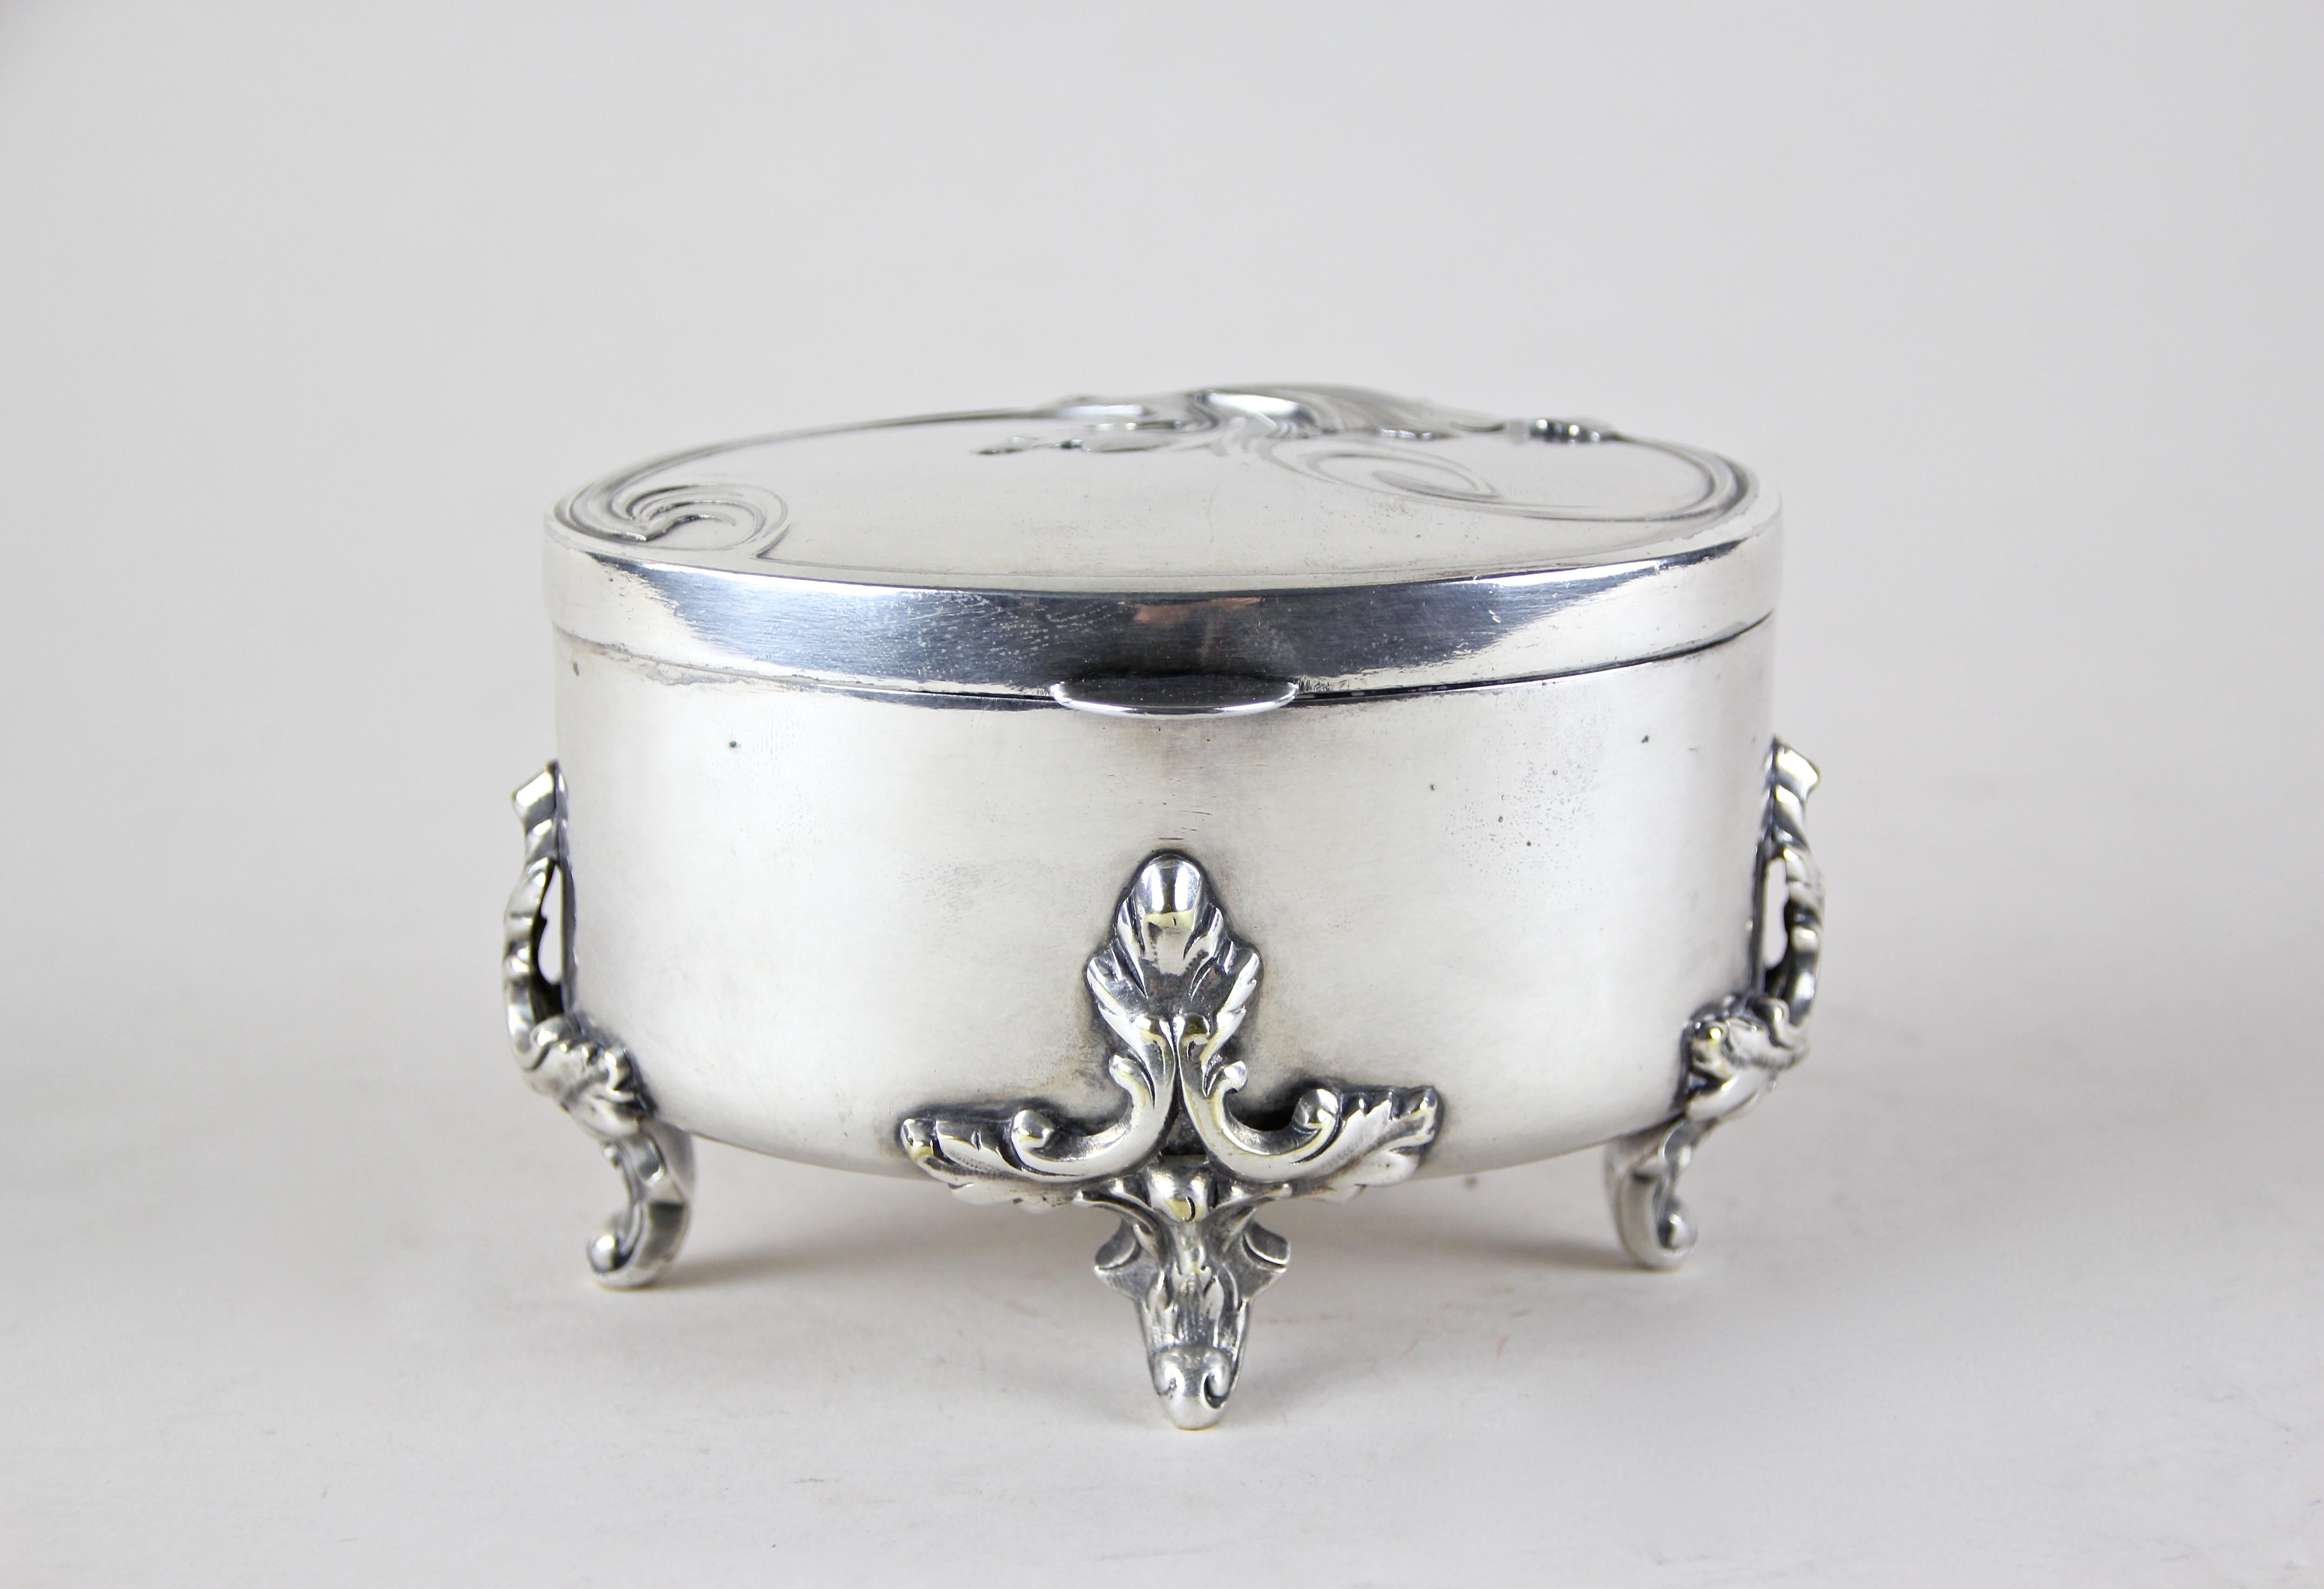 Beautiful small Silvered Brass Box by Moritz Hacker, Austria, circa 1900. Standing on four artful shaped feet, this decorative box comes with a great designed lid, showing a foliage on top. A real nice piece of a silvered Art Nouveau box, hallmarked